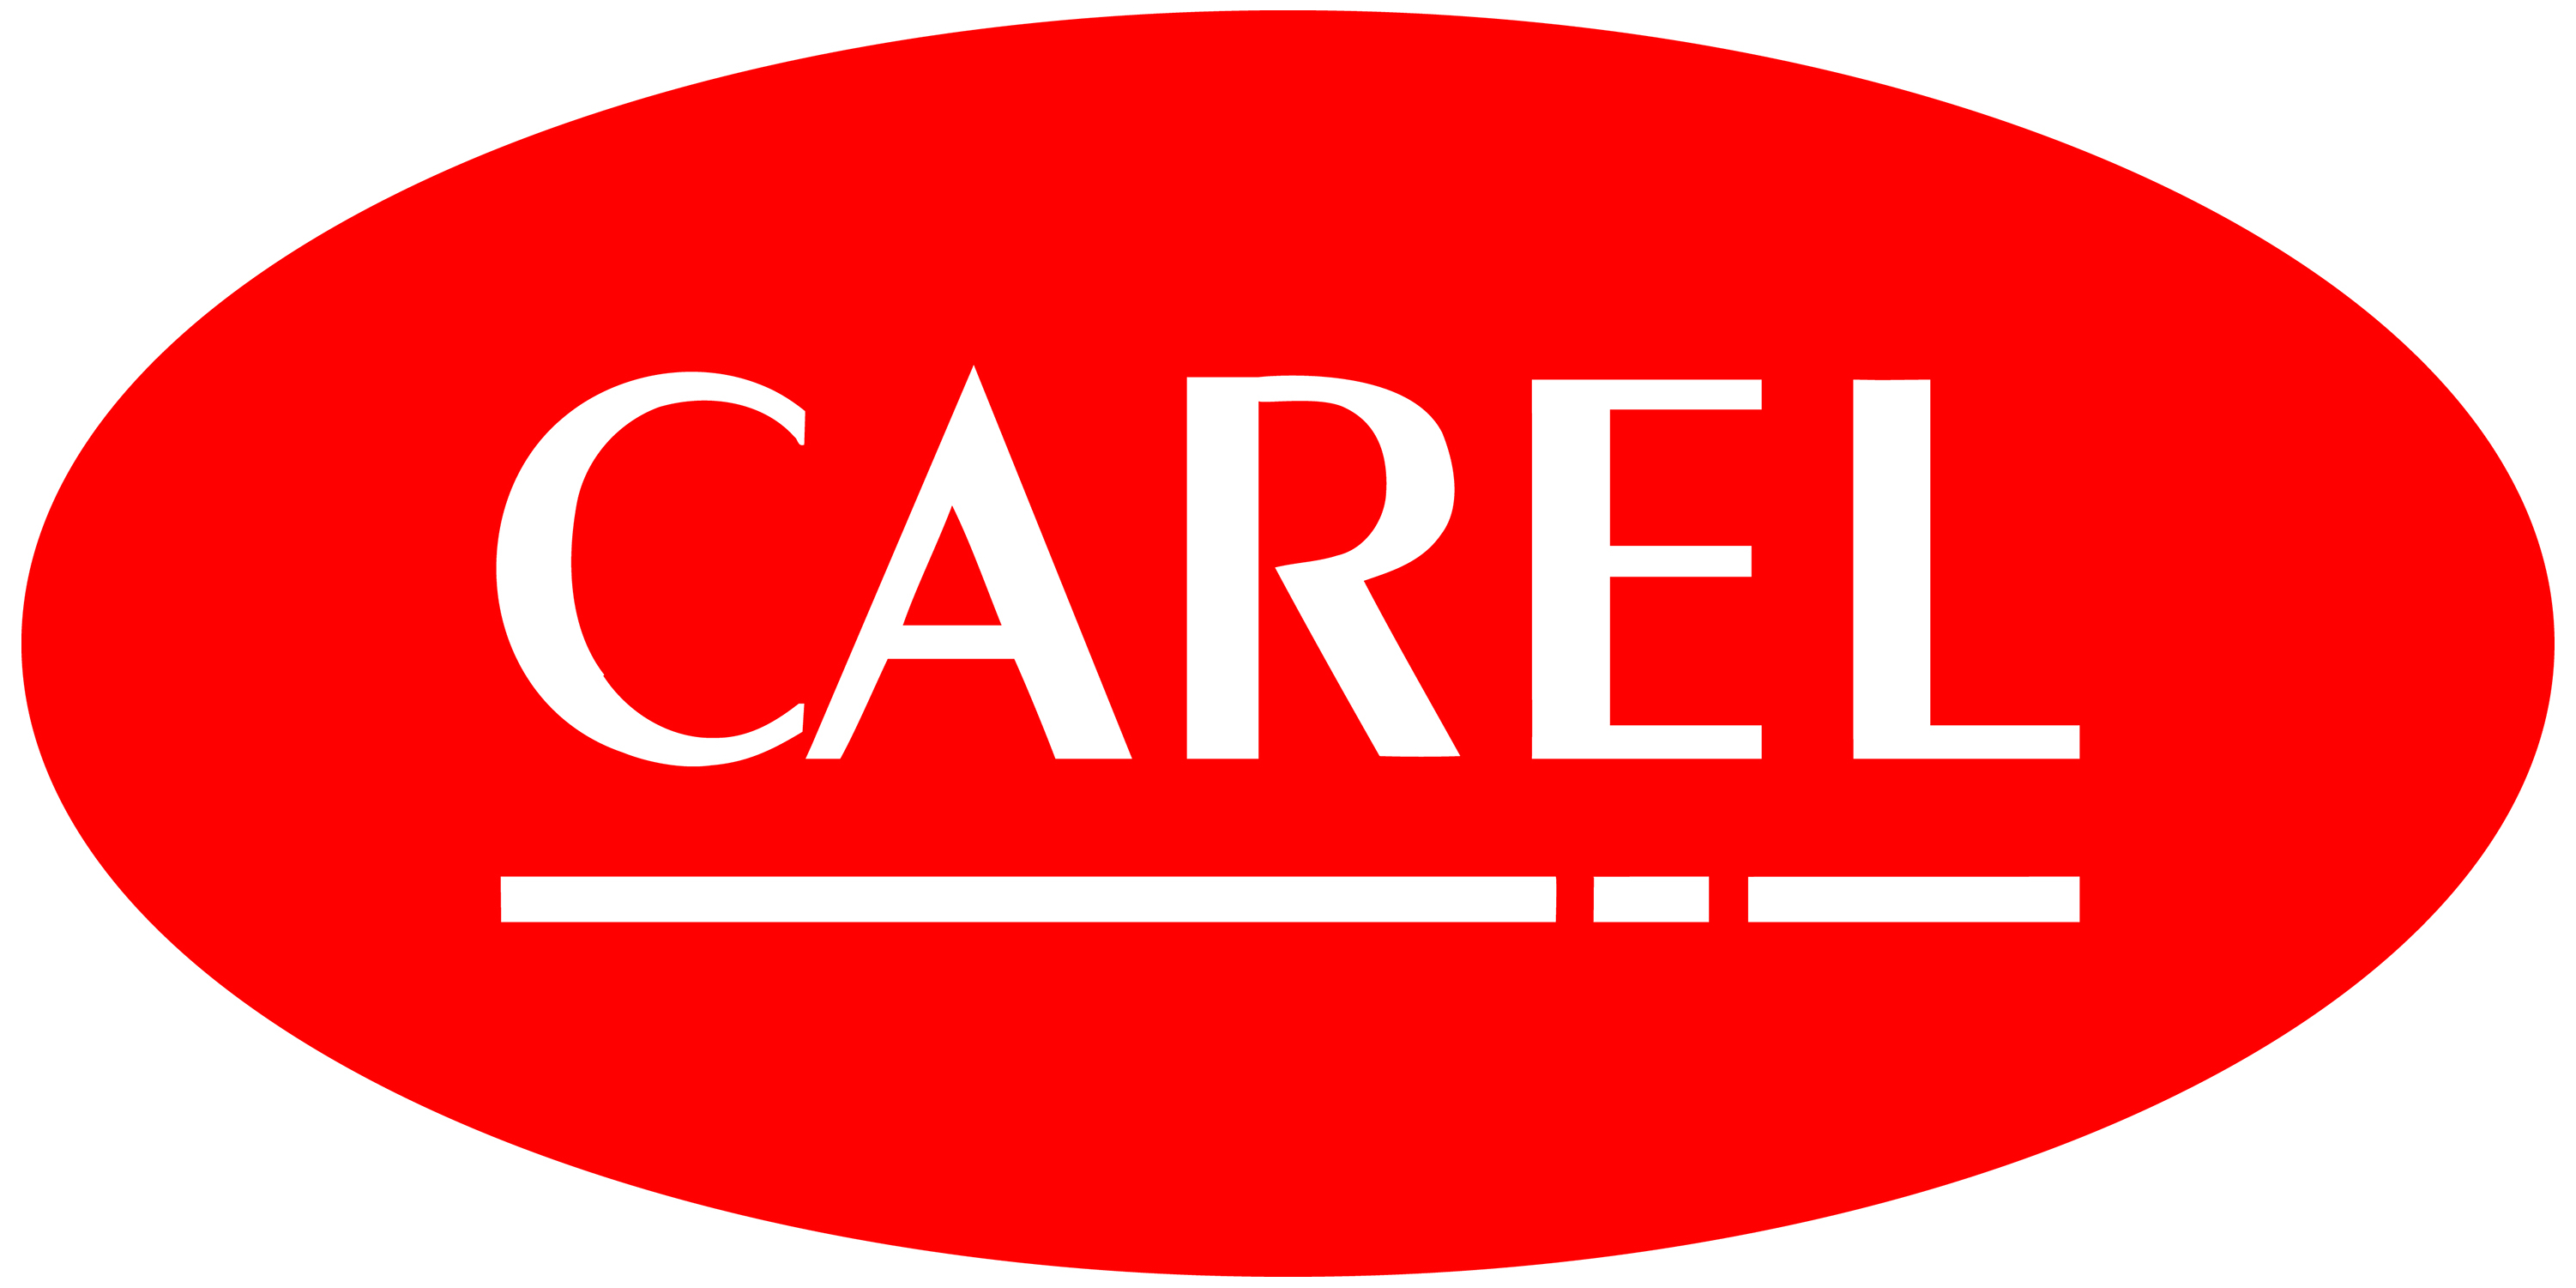 Tool for selecting and configuring CAREL products